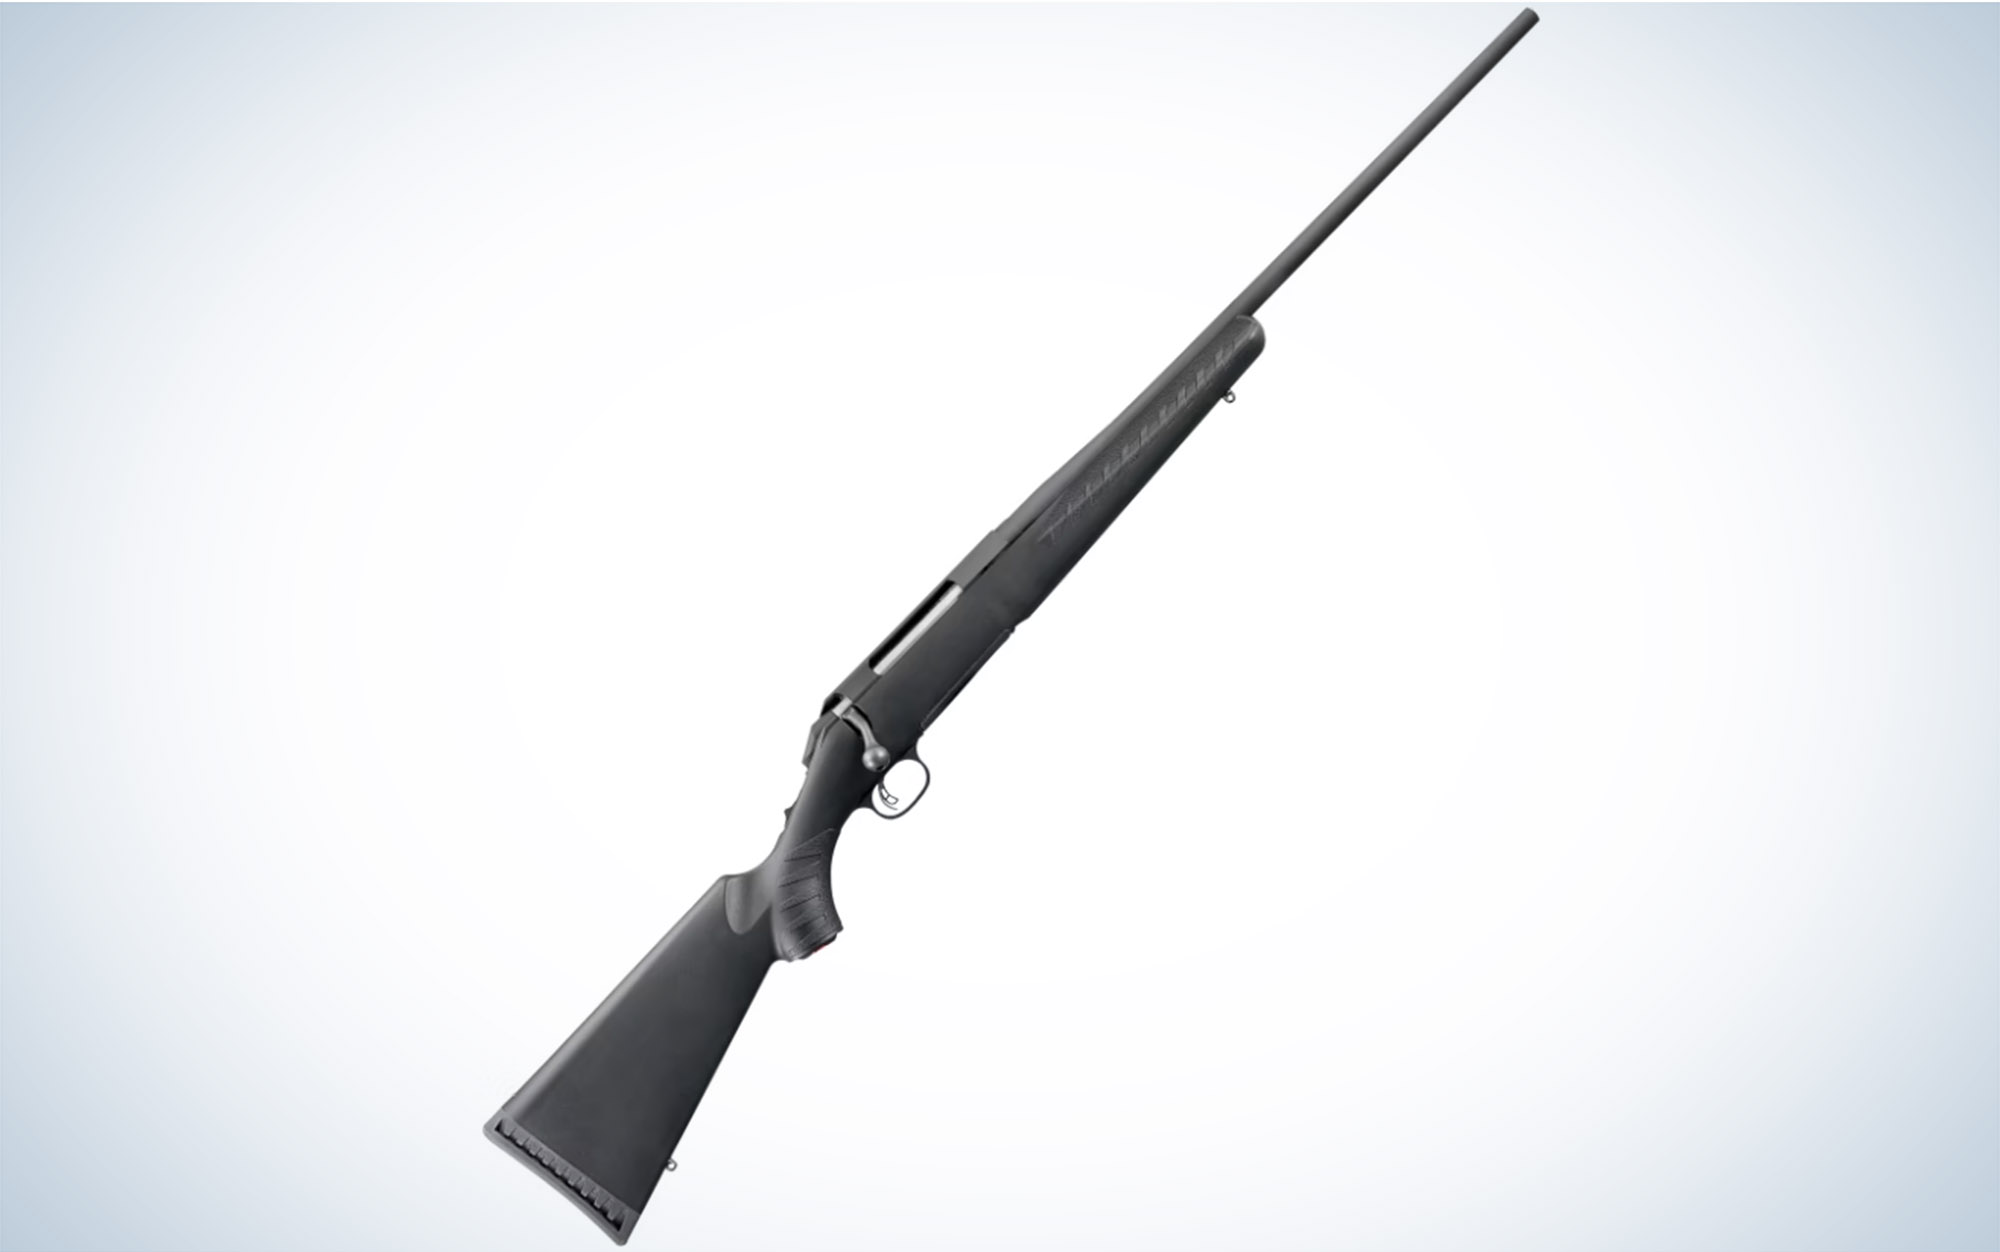 The Ruger American is one of the best guns for hog hunting.